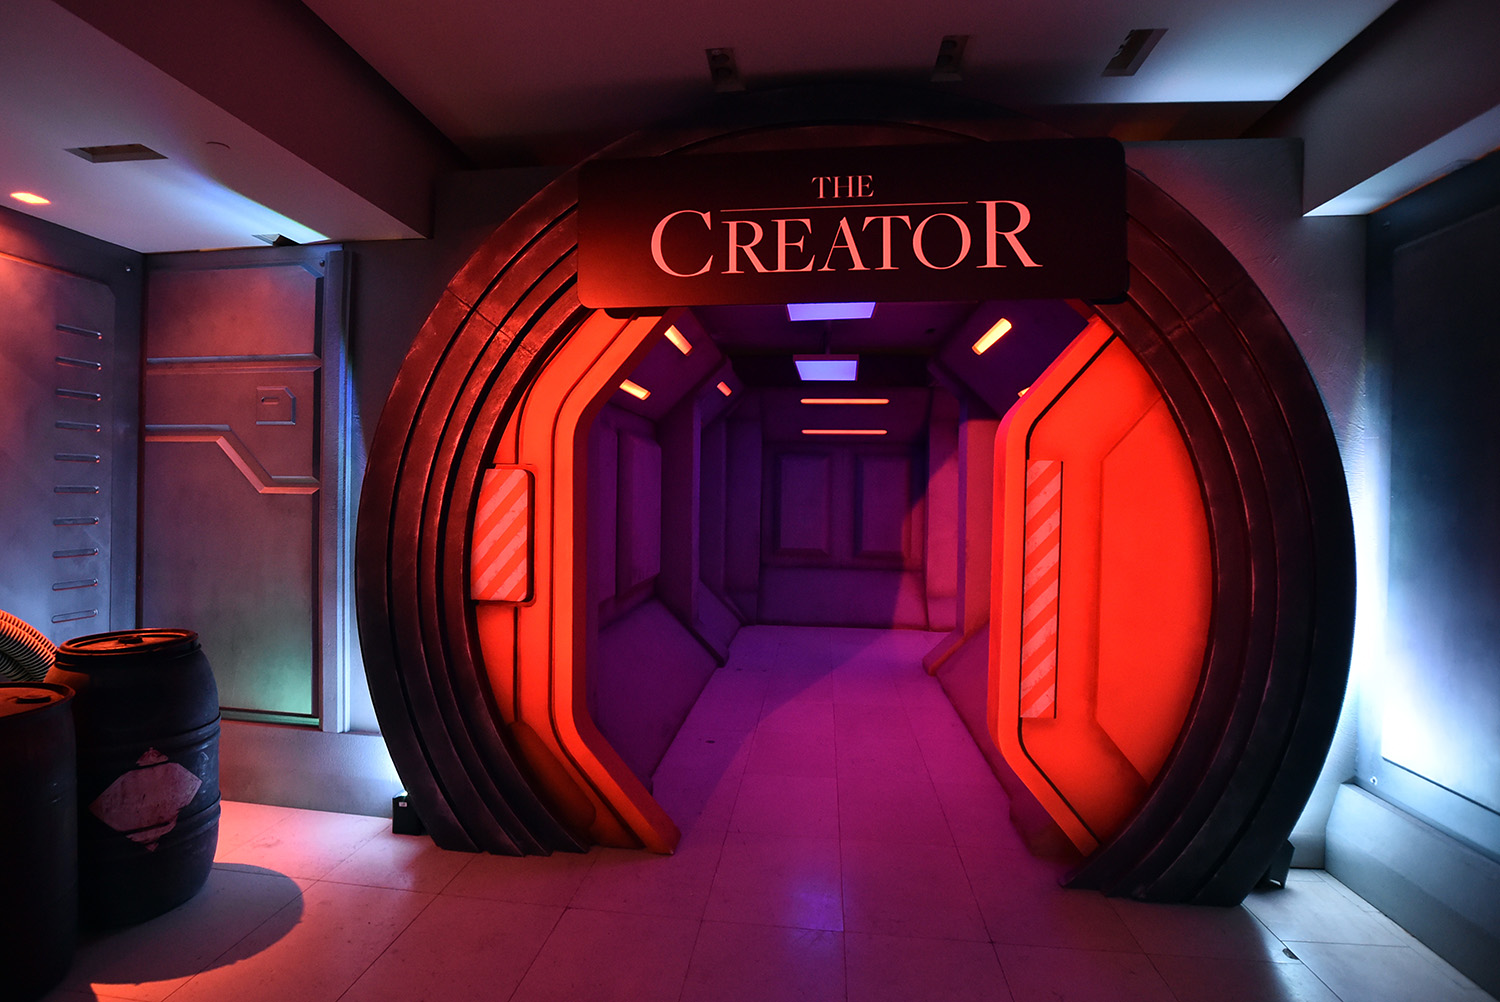 Displays and signage are seen during a special screening of 20th Century Studios' "The Creator" at TCL Chinese Theatre in Hollywood, California on September 18, 2023.